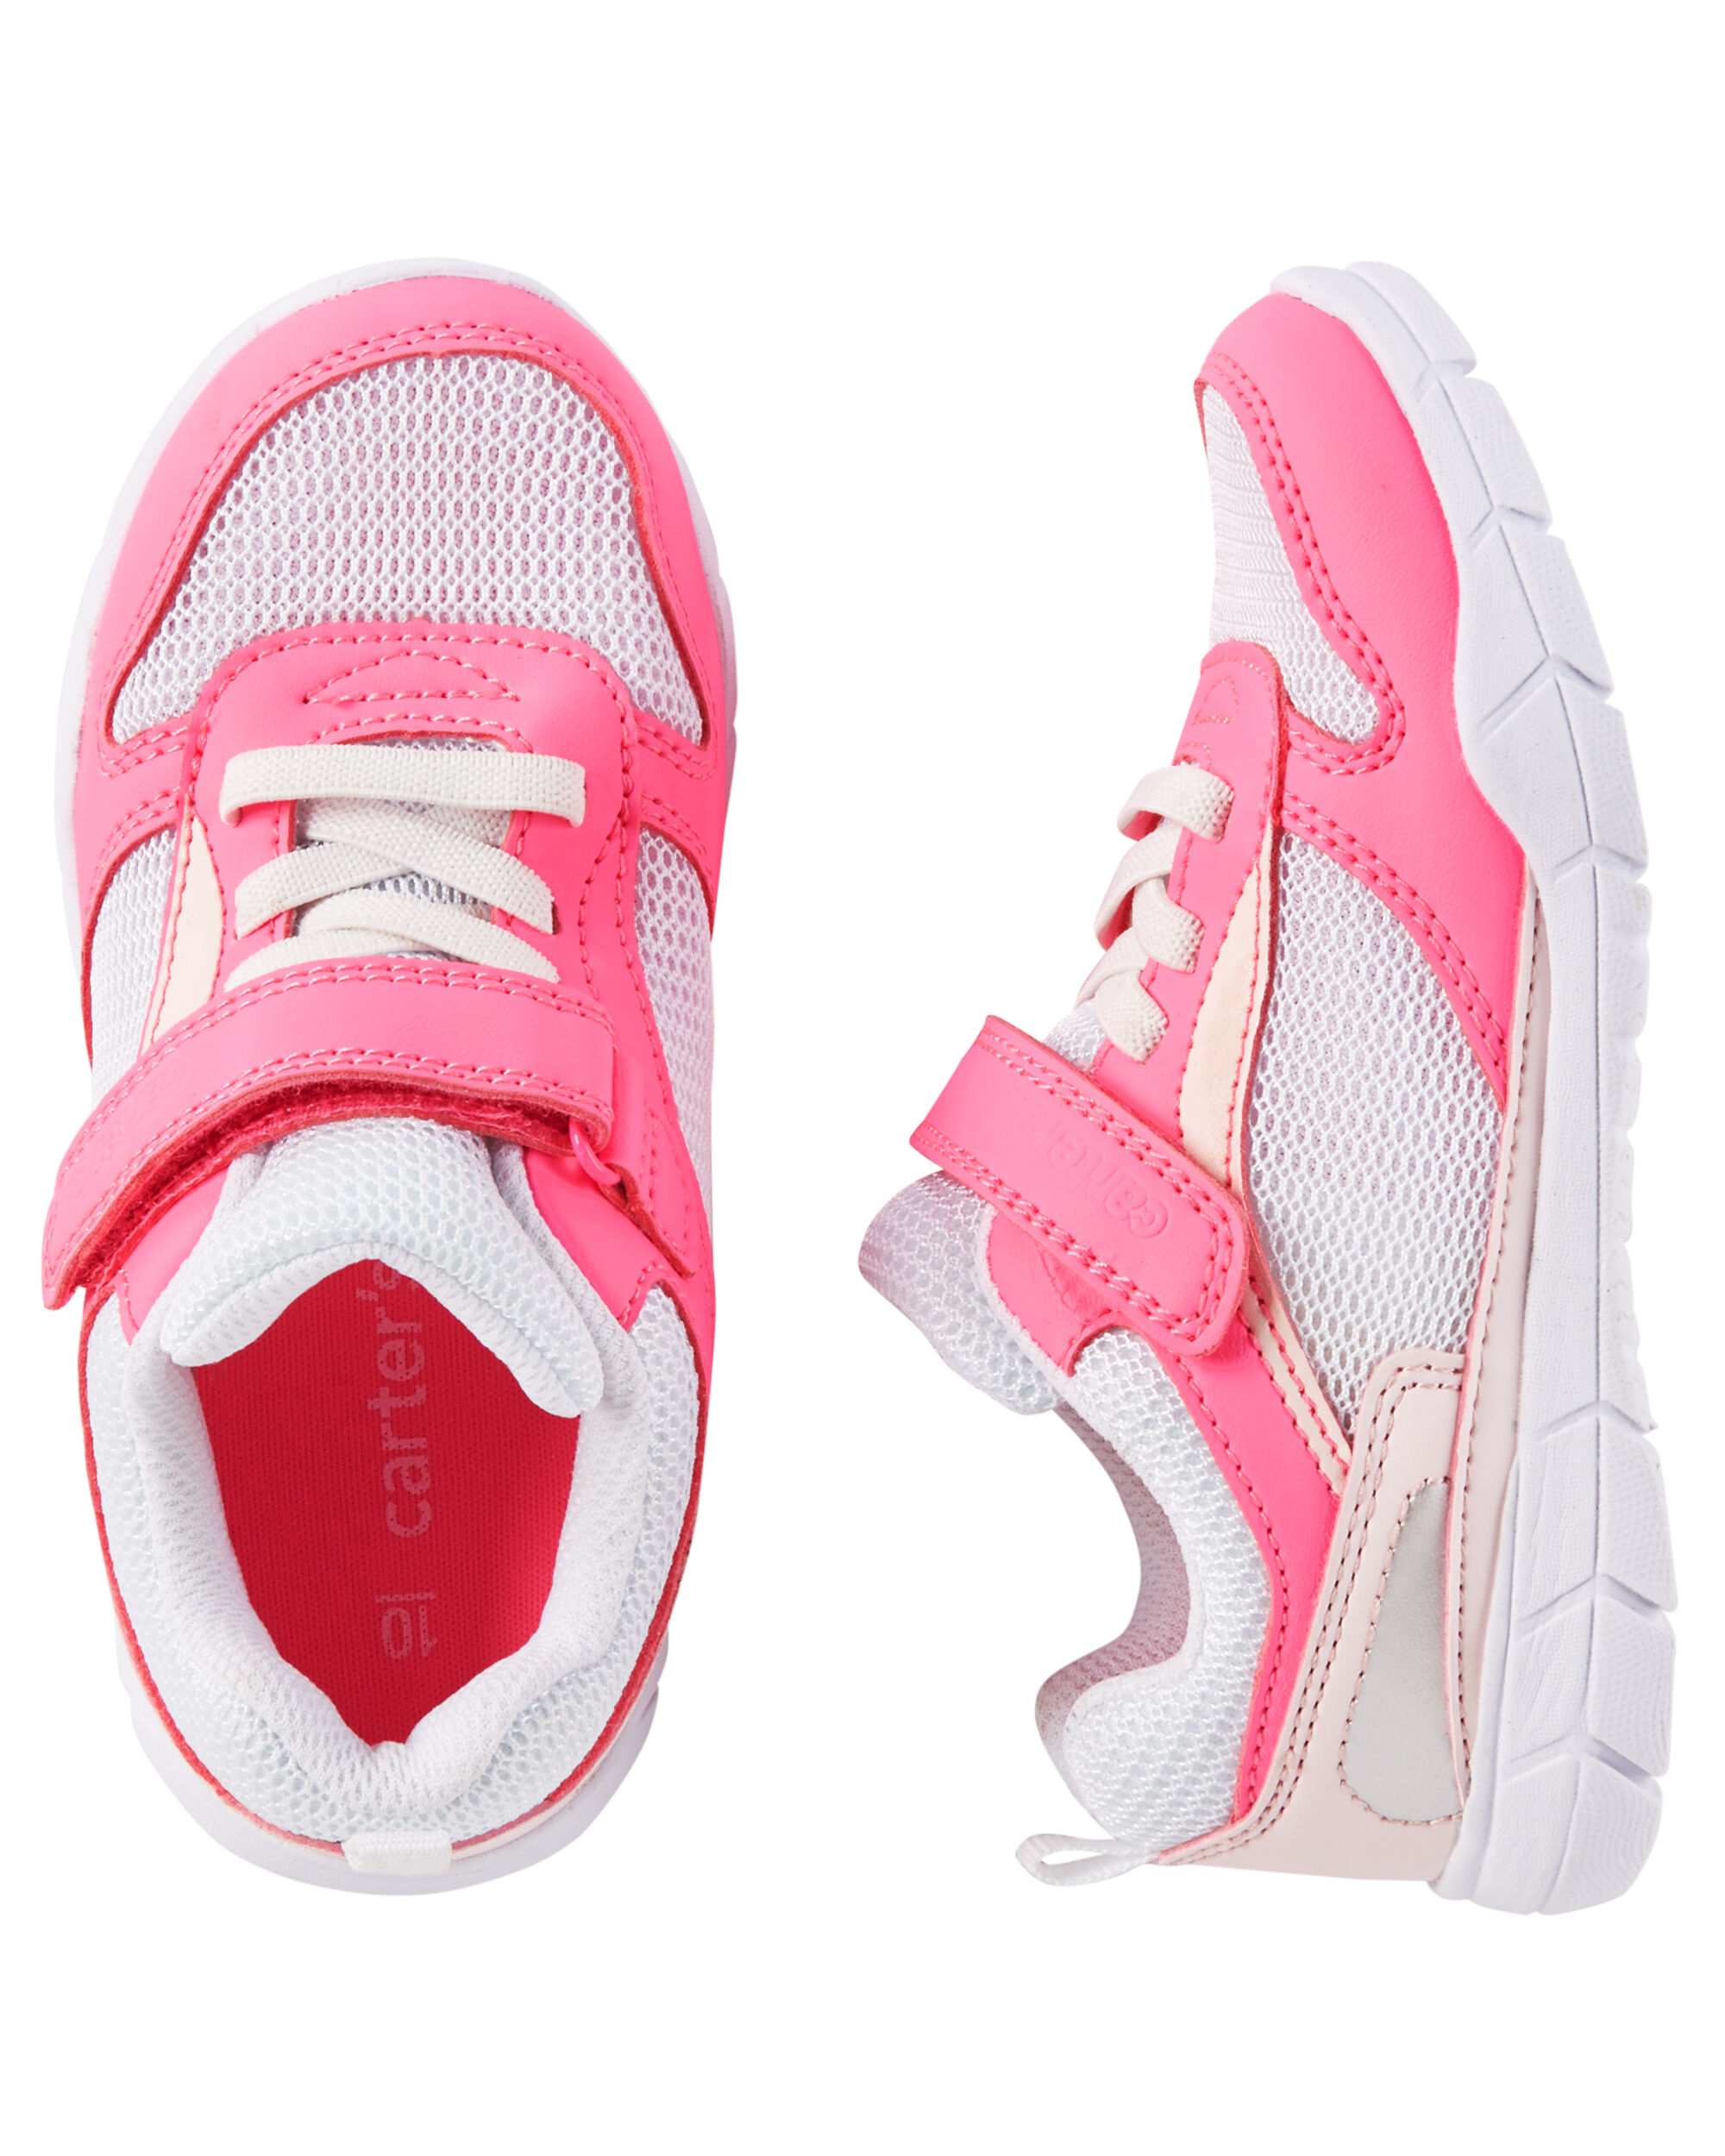 Carter's Athletic Sneakers | Carters.com